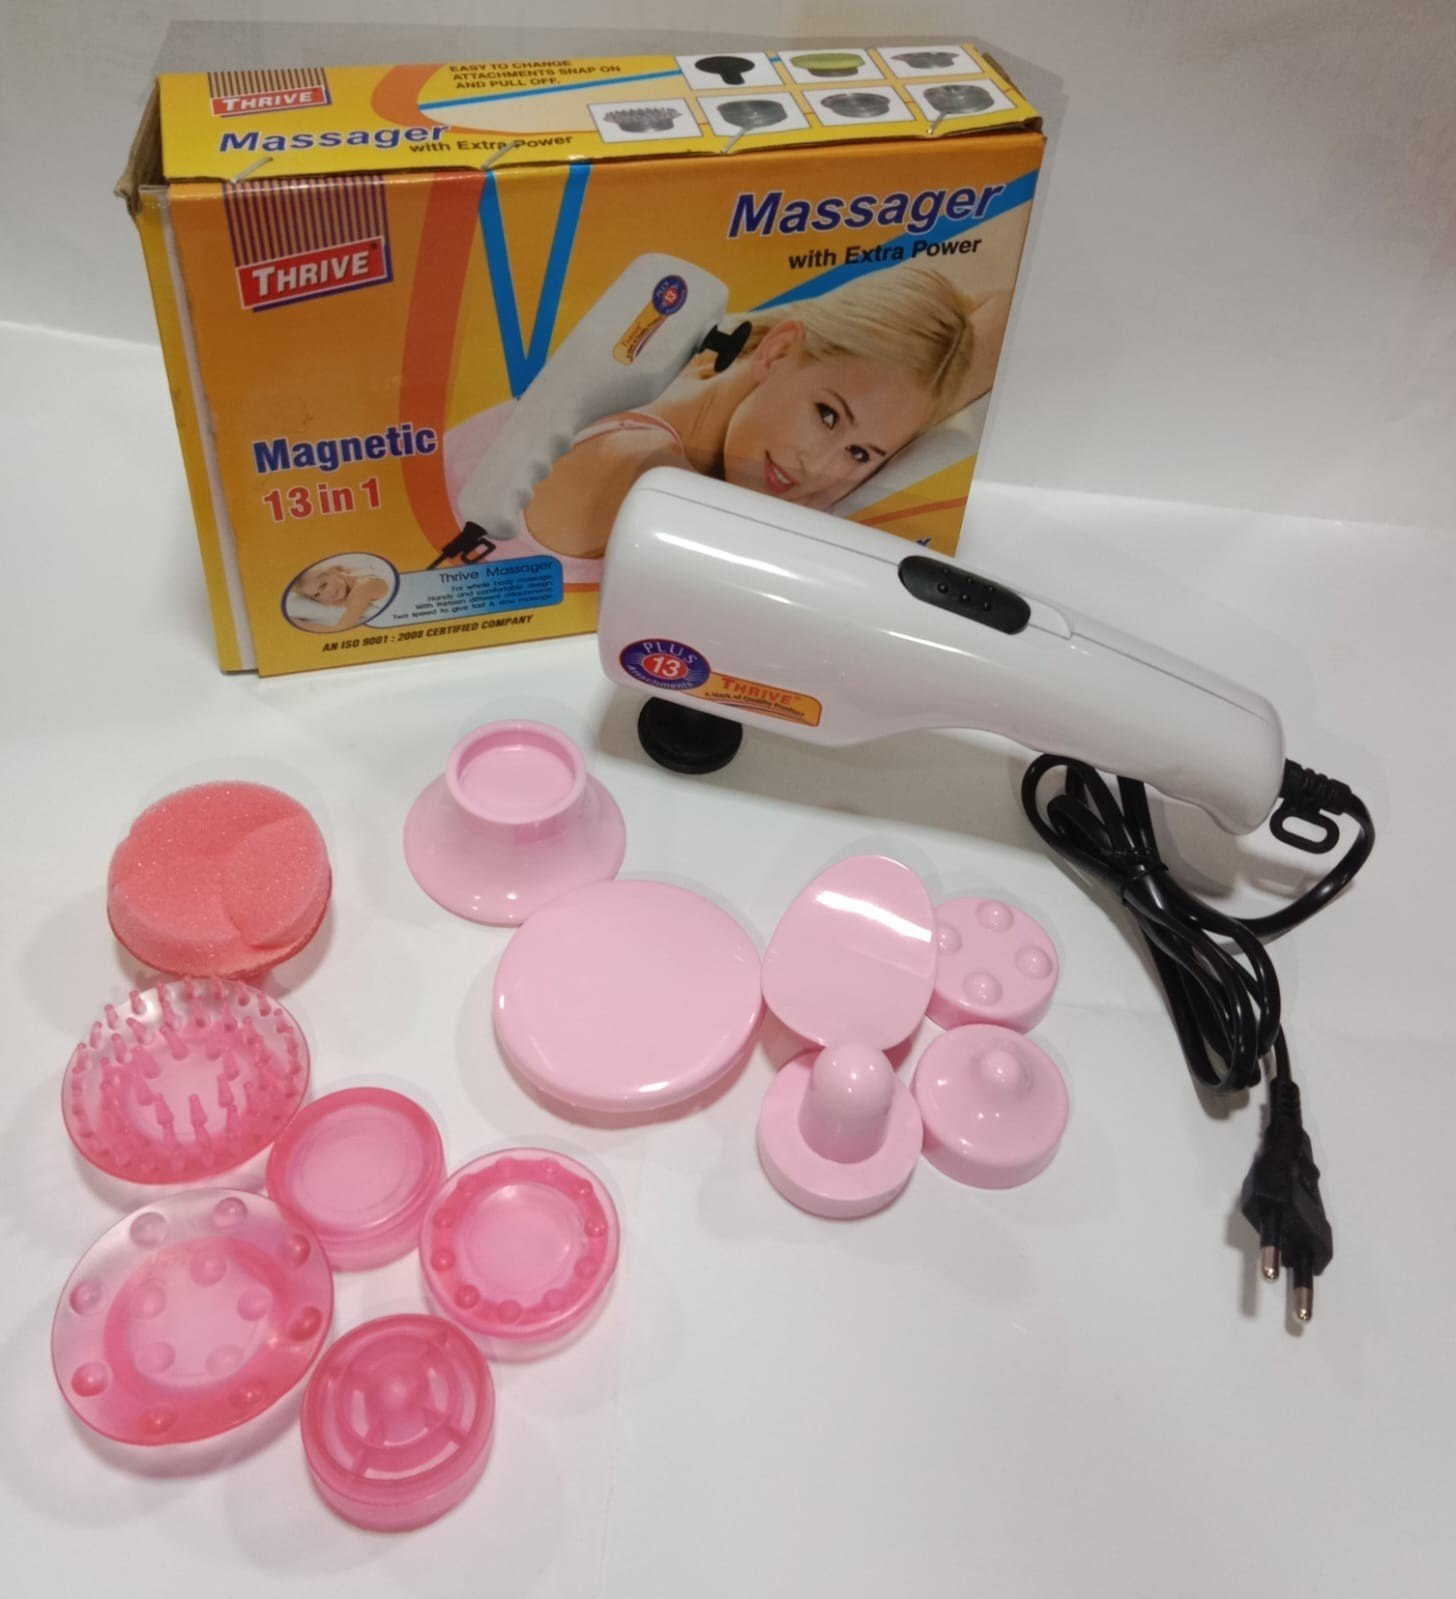 Magnetic Professional Body Massager with 13 Power Attachments